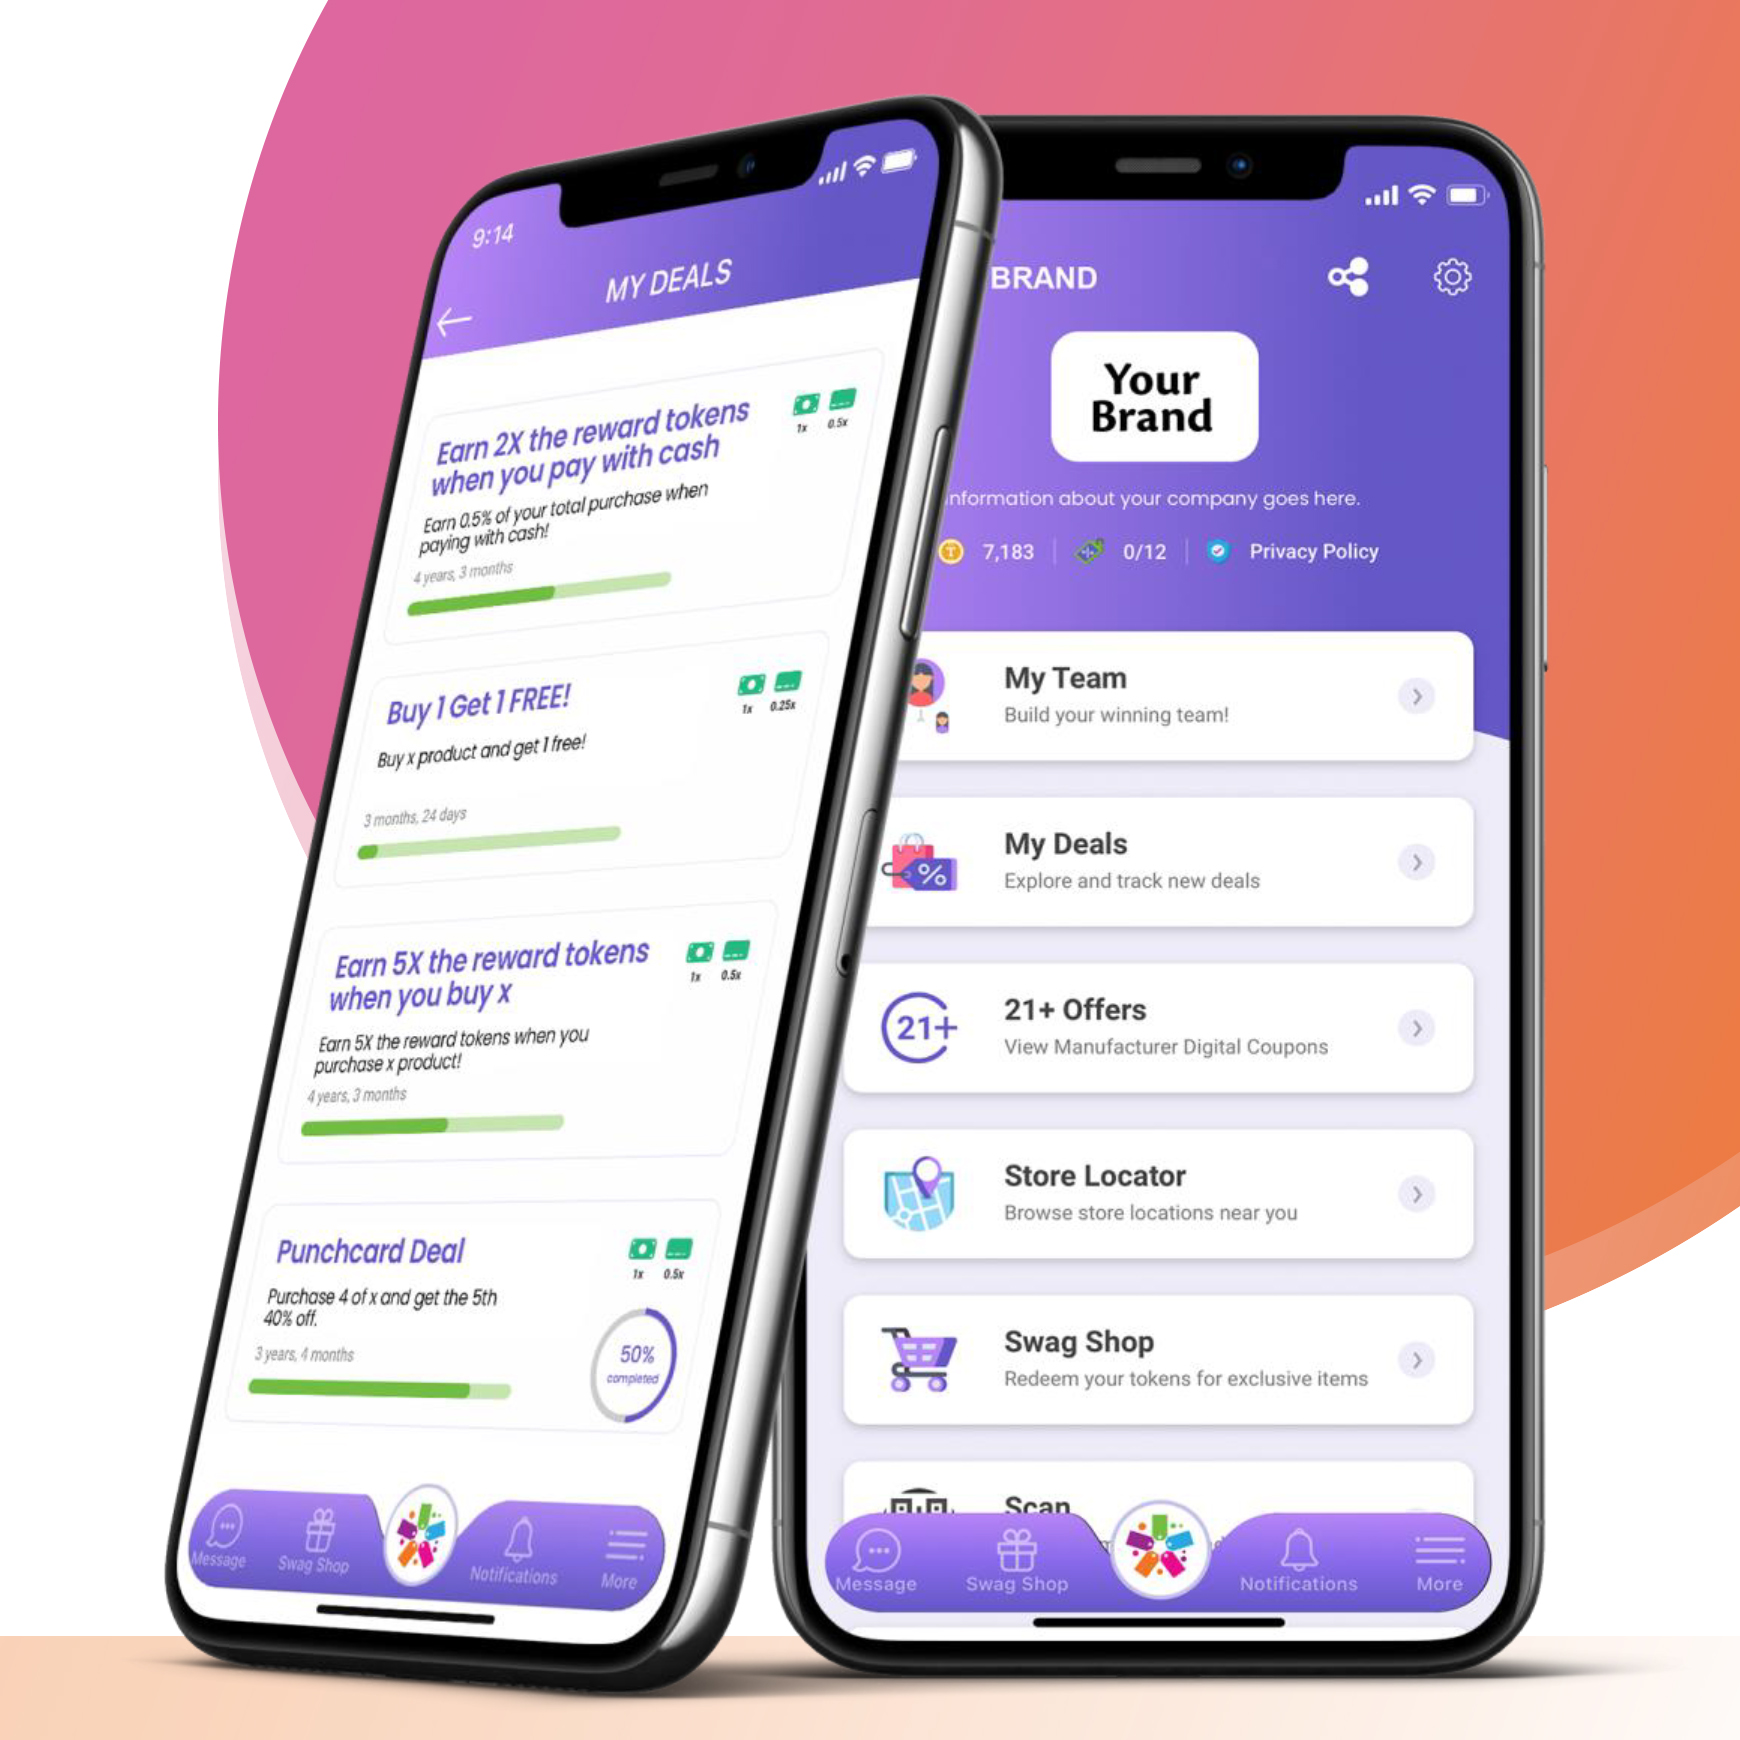 Loyal-n-Save mobile app travels anywhere, and is available on the Apple App Store and Google Play Store. Give your customers the flexibility to enjoy exclusive discounts for loyal customers.